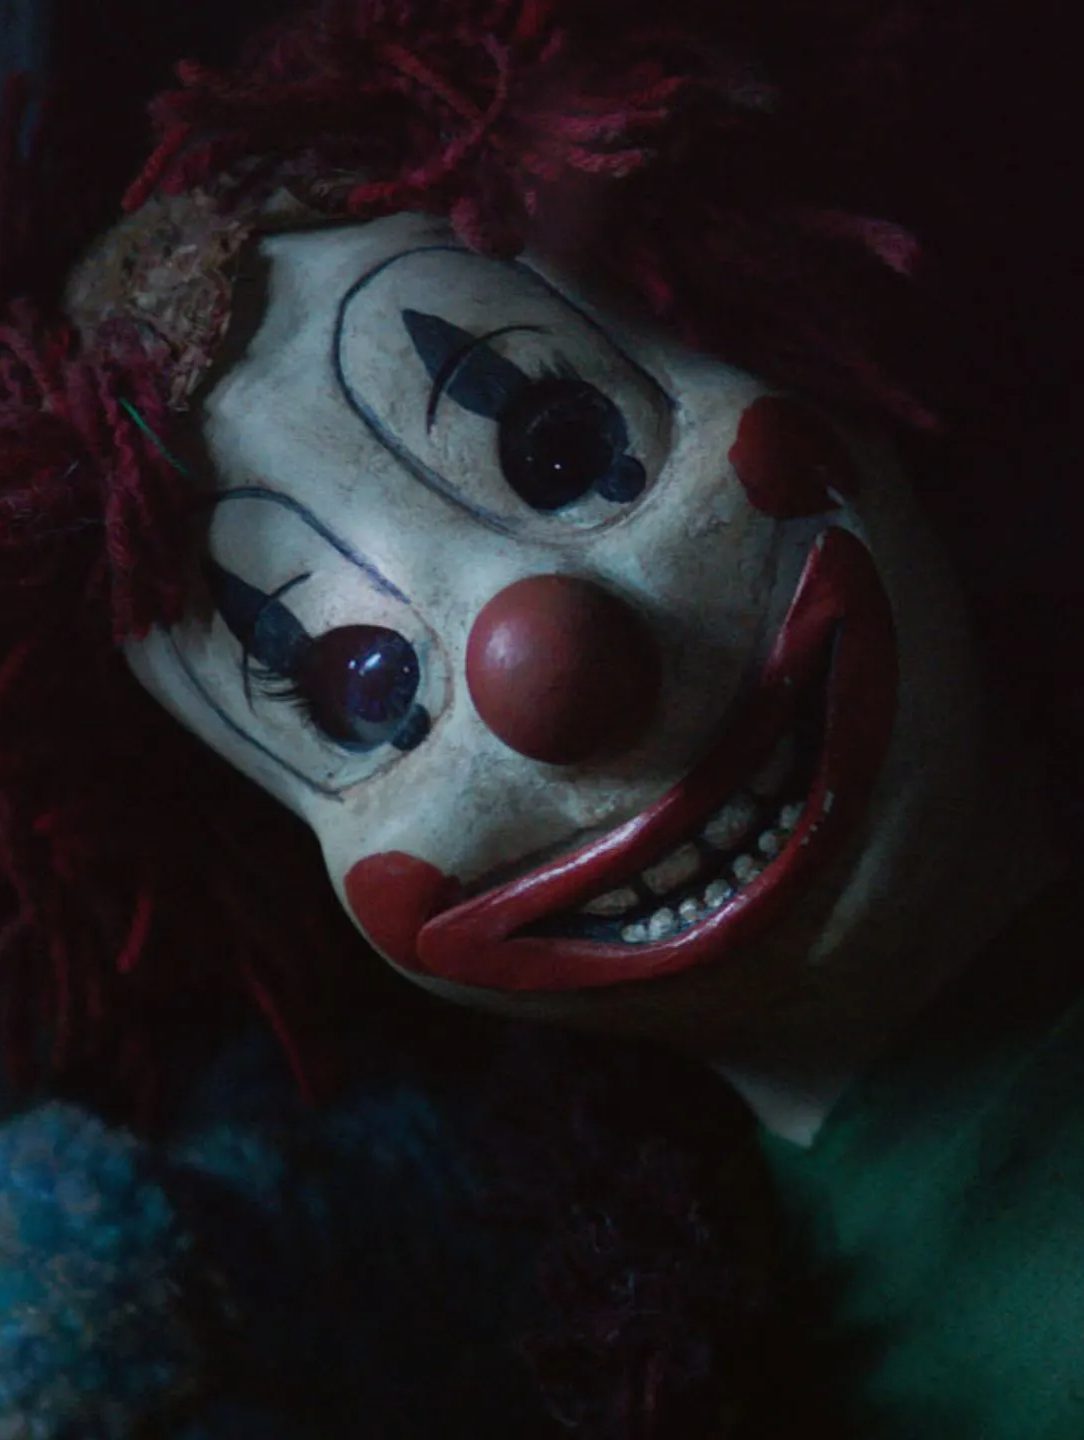 A creepy clown doll face with large red lips and a round red nose.